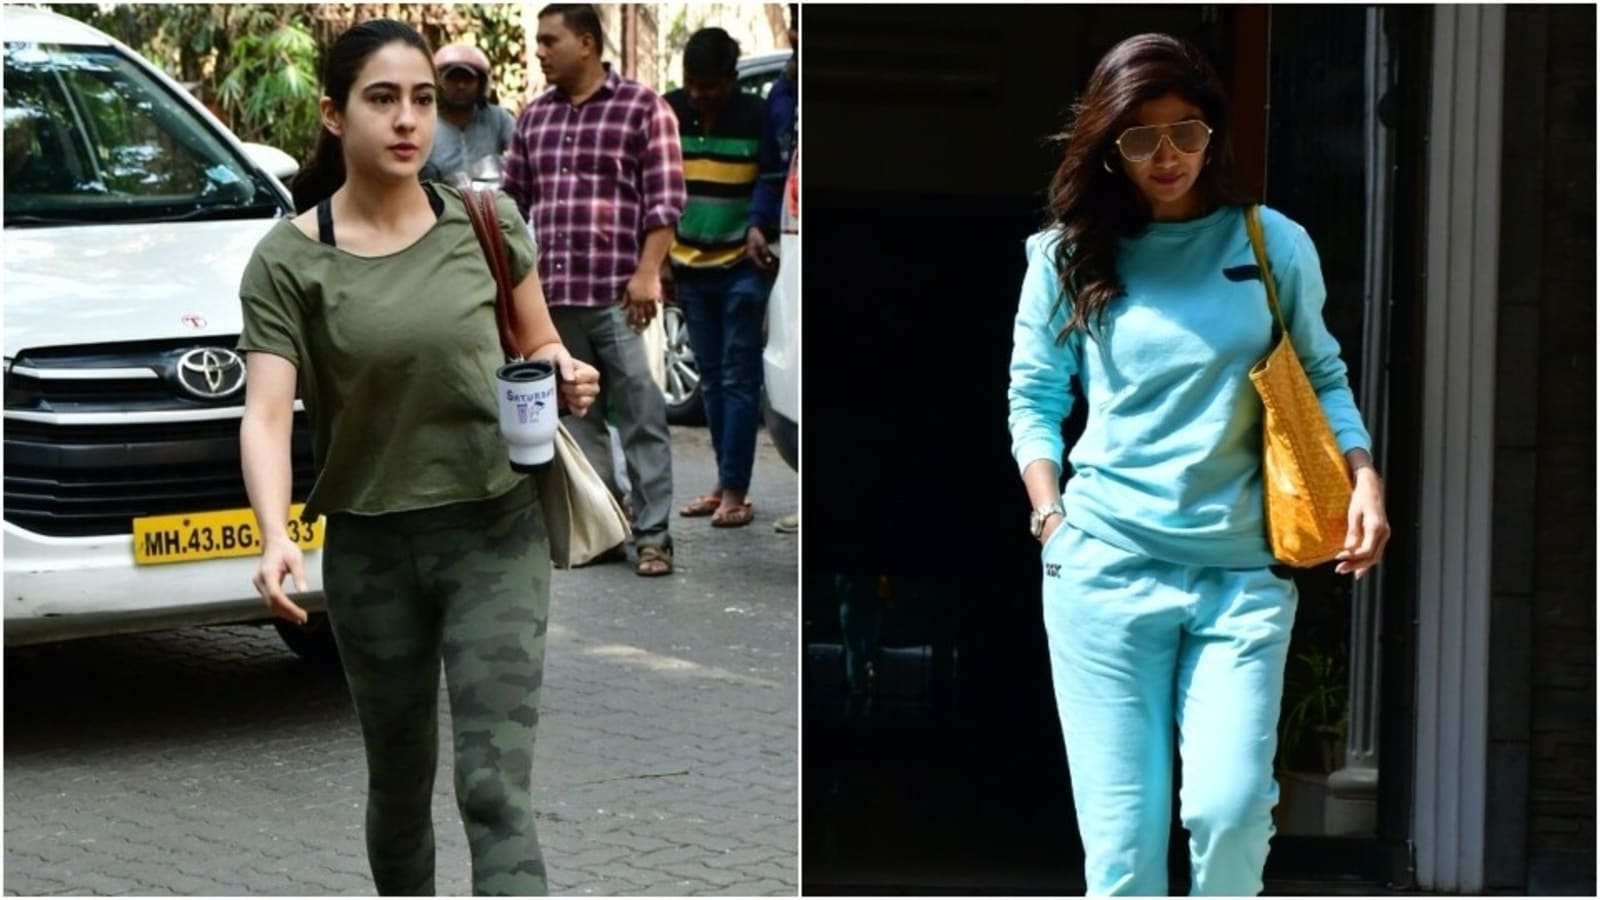 Sara Ali Khan and Shilpa Shetty glam up the Mumbai streets with their comfy athleisure looks. Check out pics